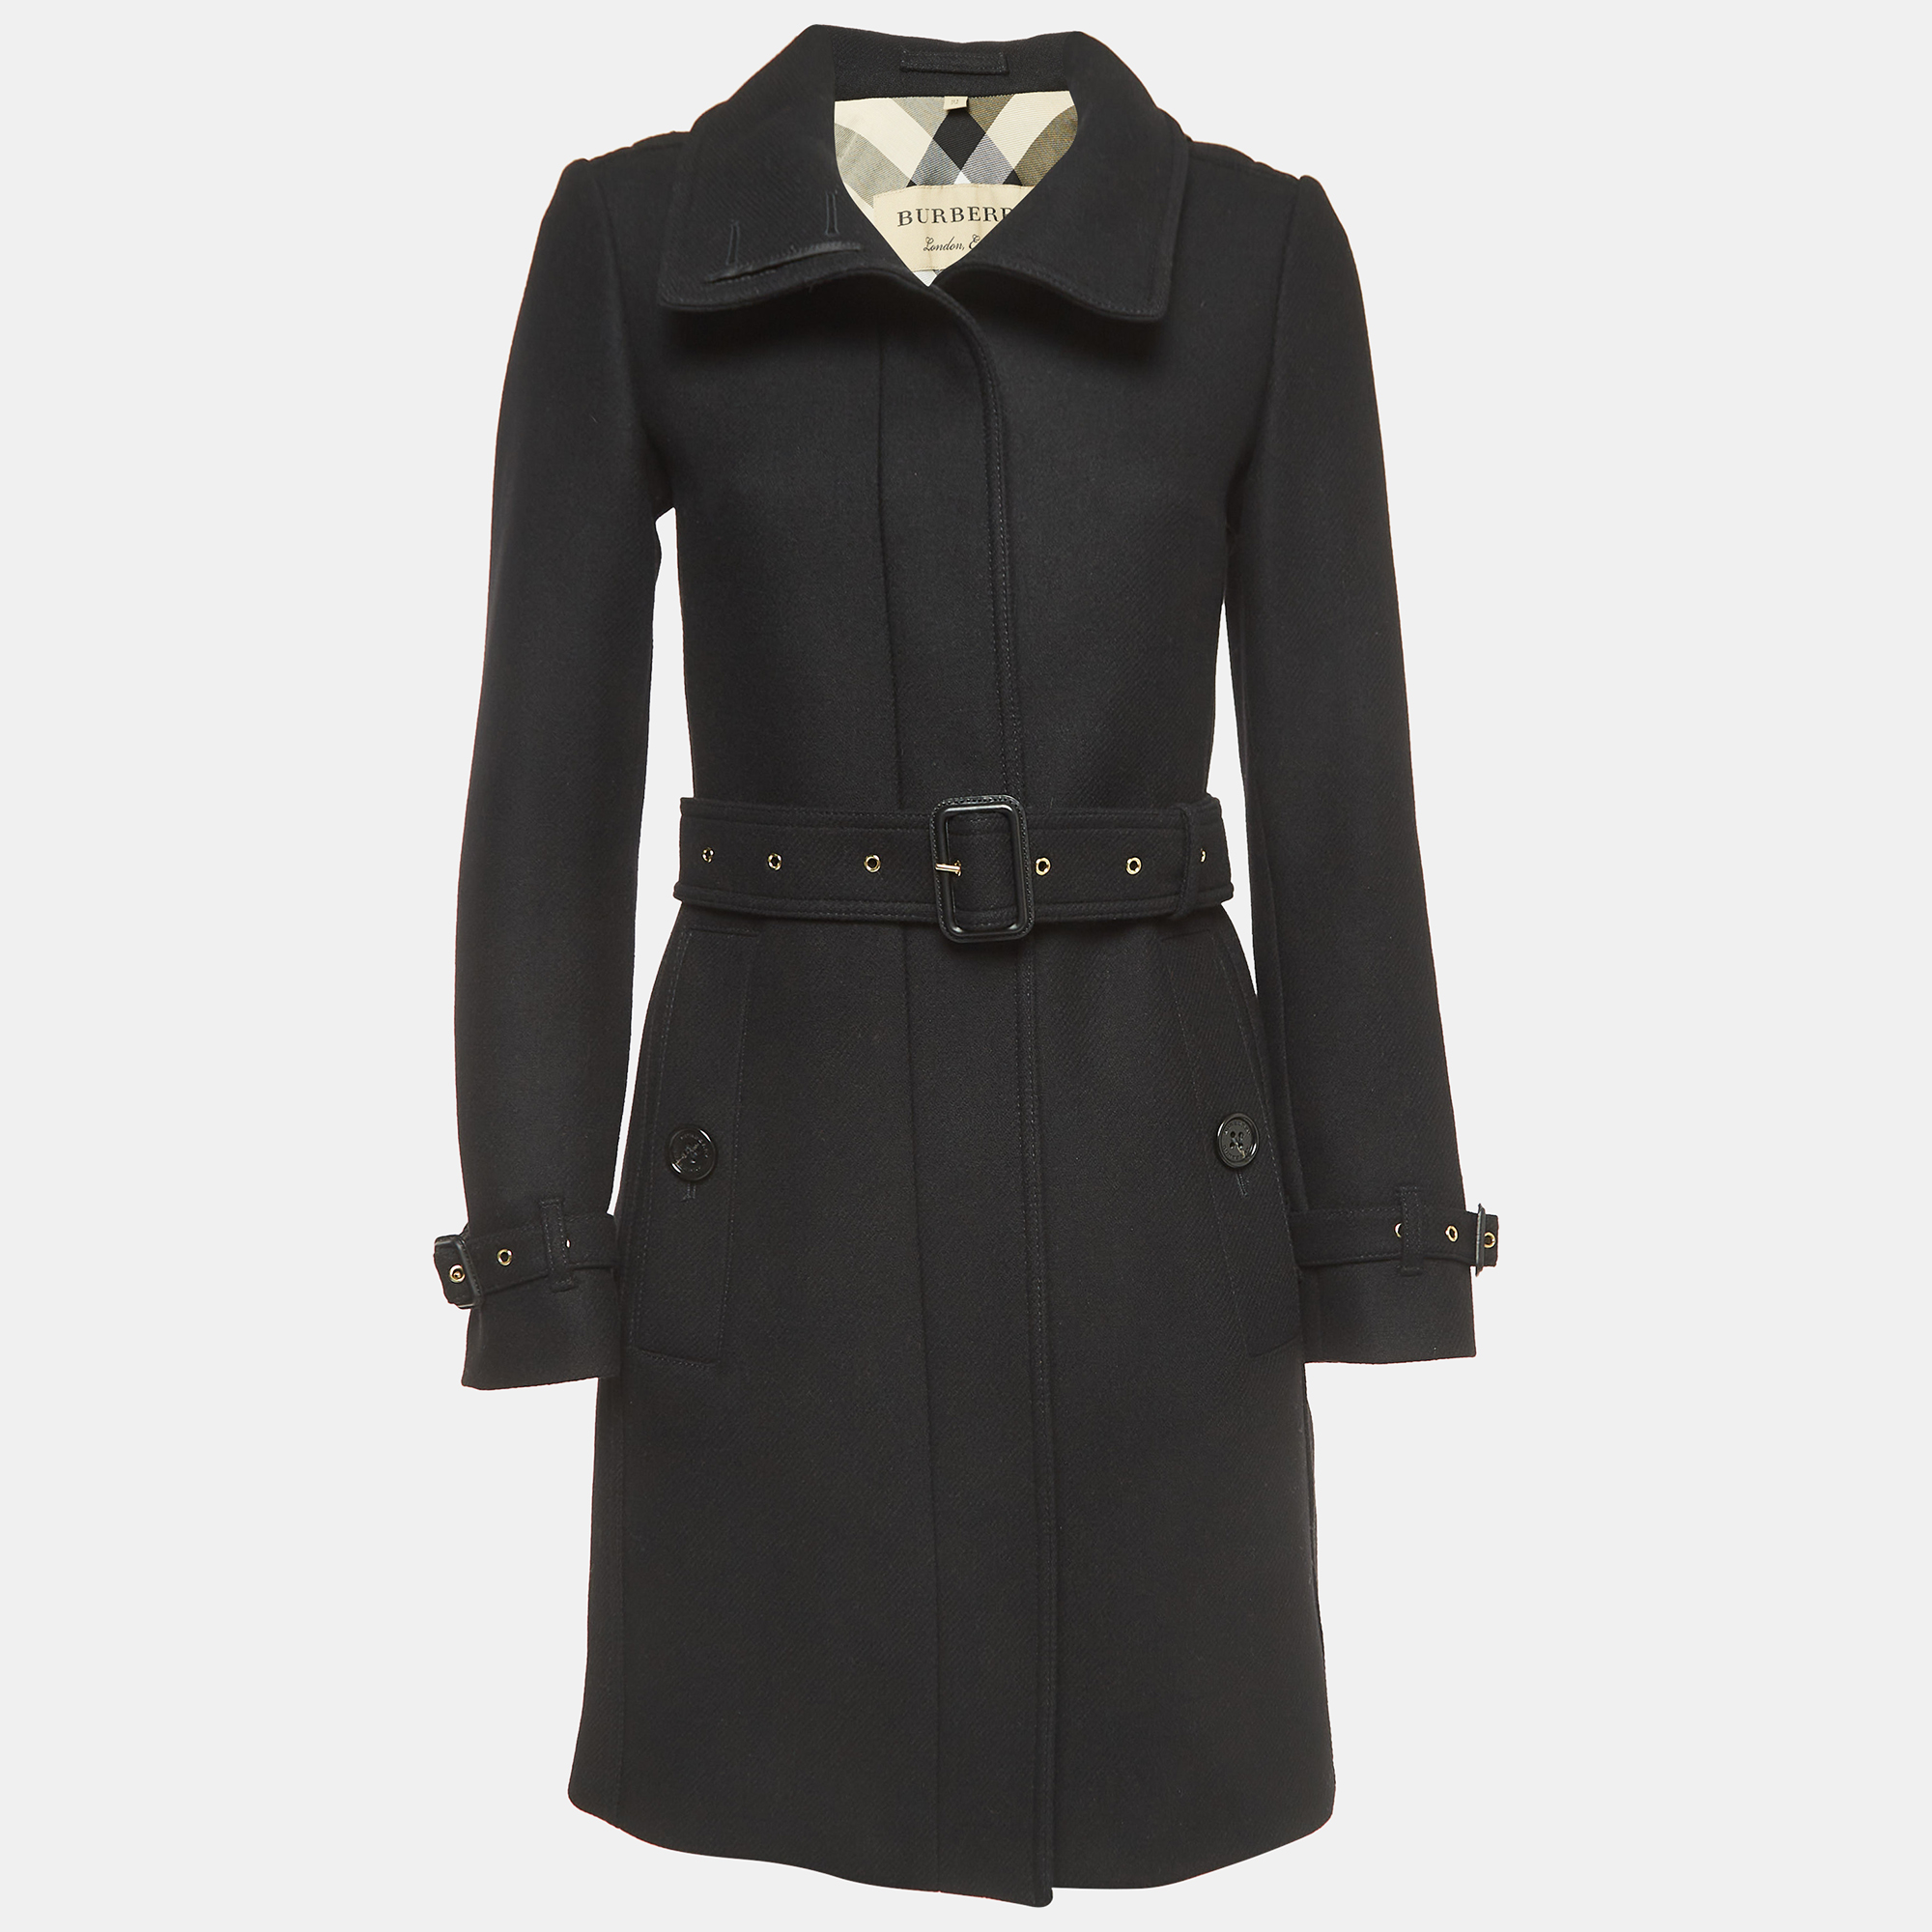 Burberry Black Wool Blend Single Breasted Belted Trench Coat S